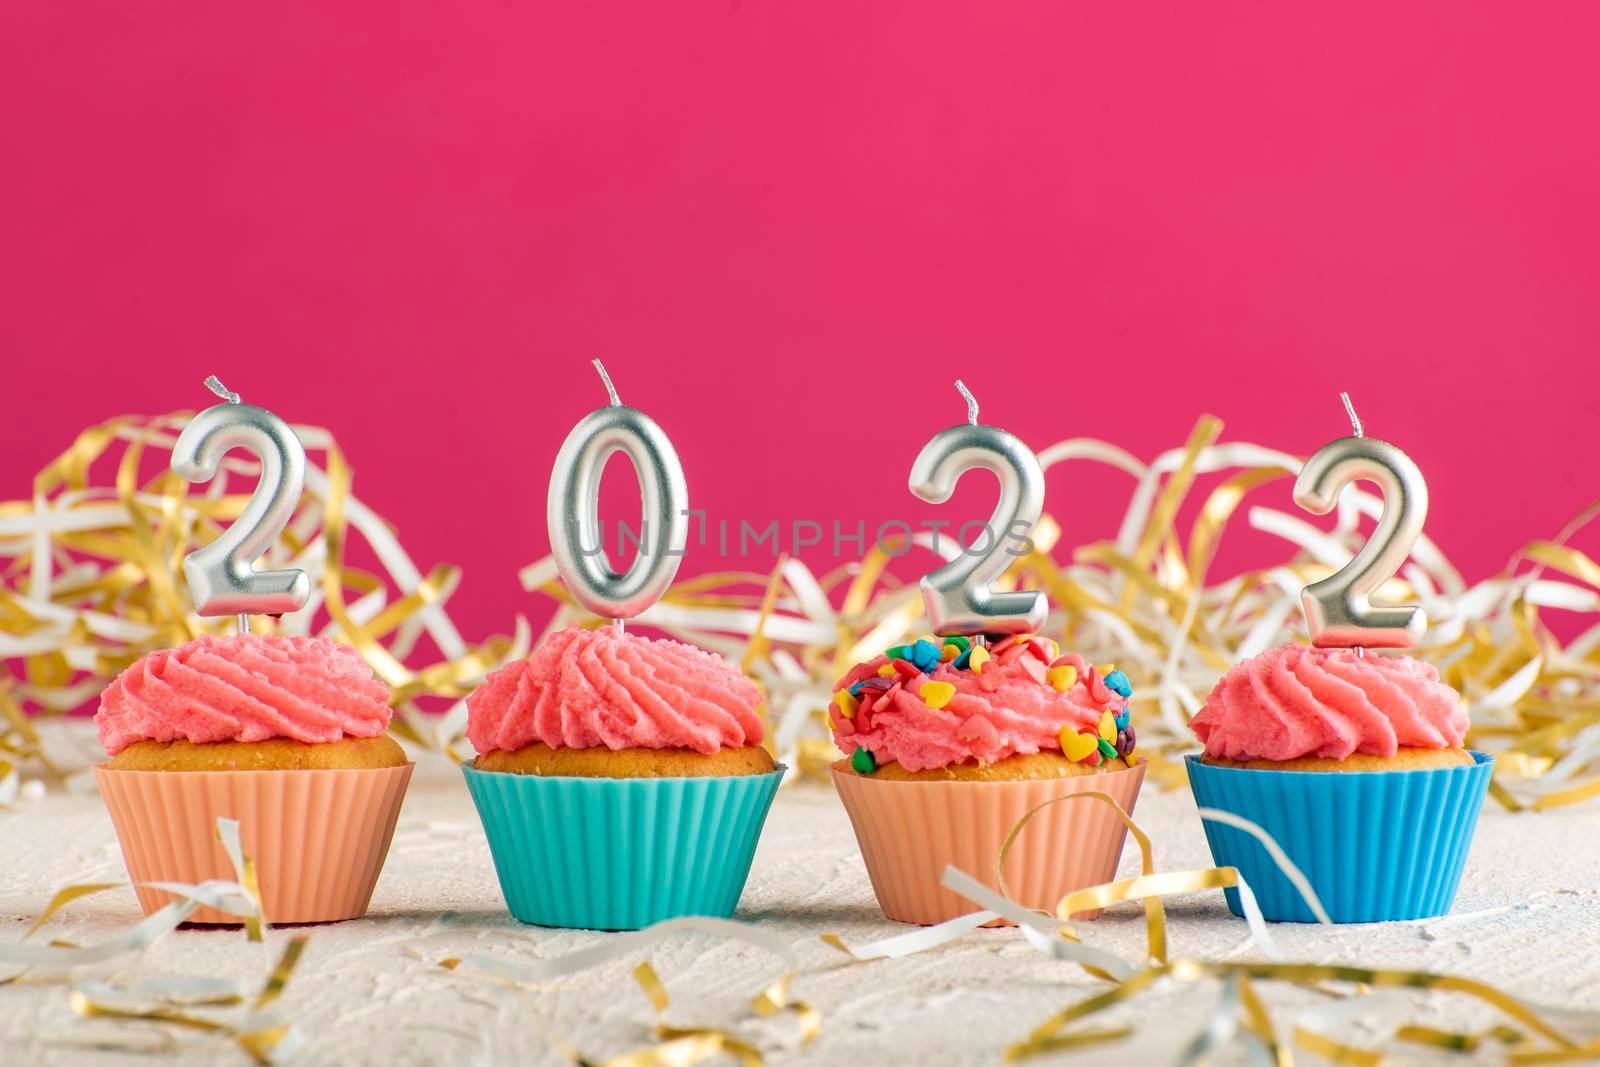 Festive cupcakes and candles in form of numbers 2022 on pink background. Concept of New year